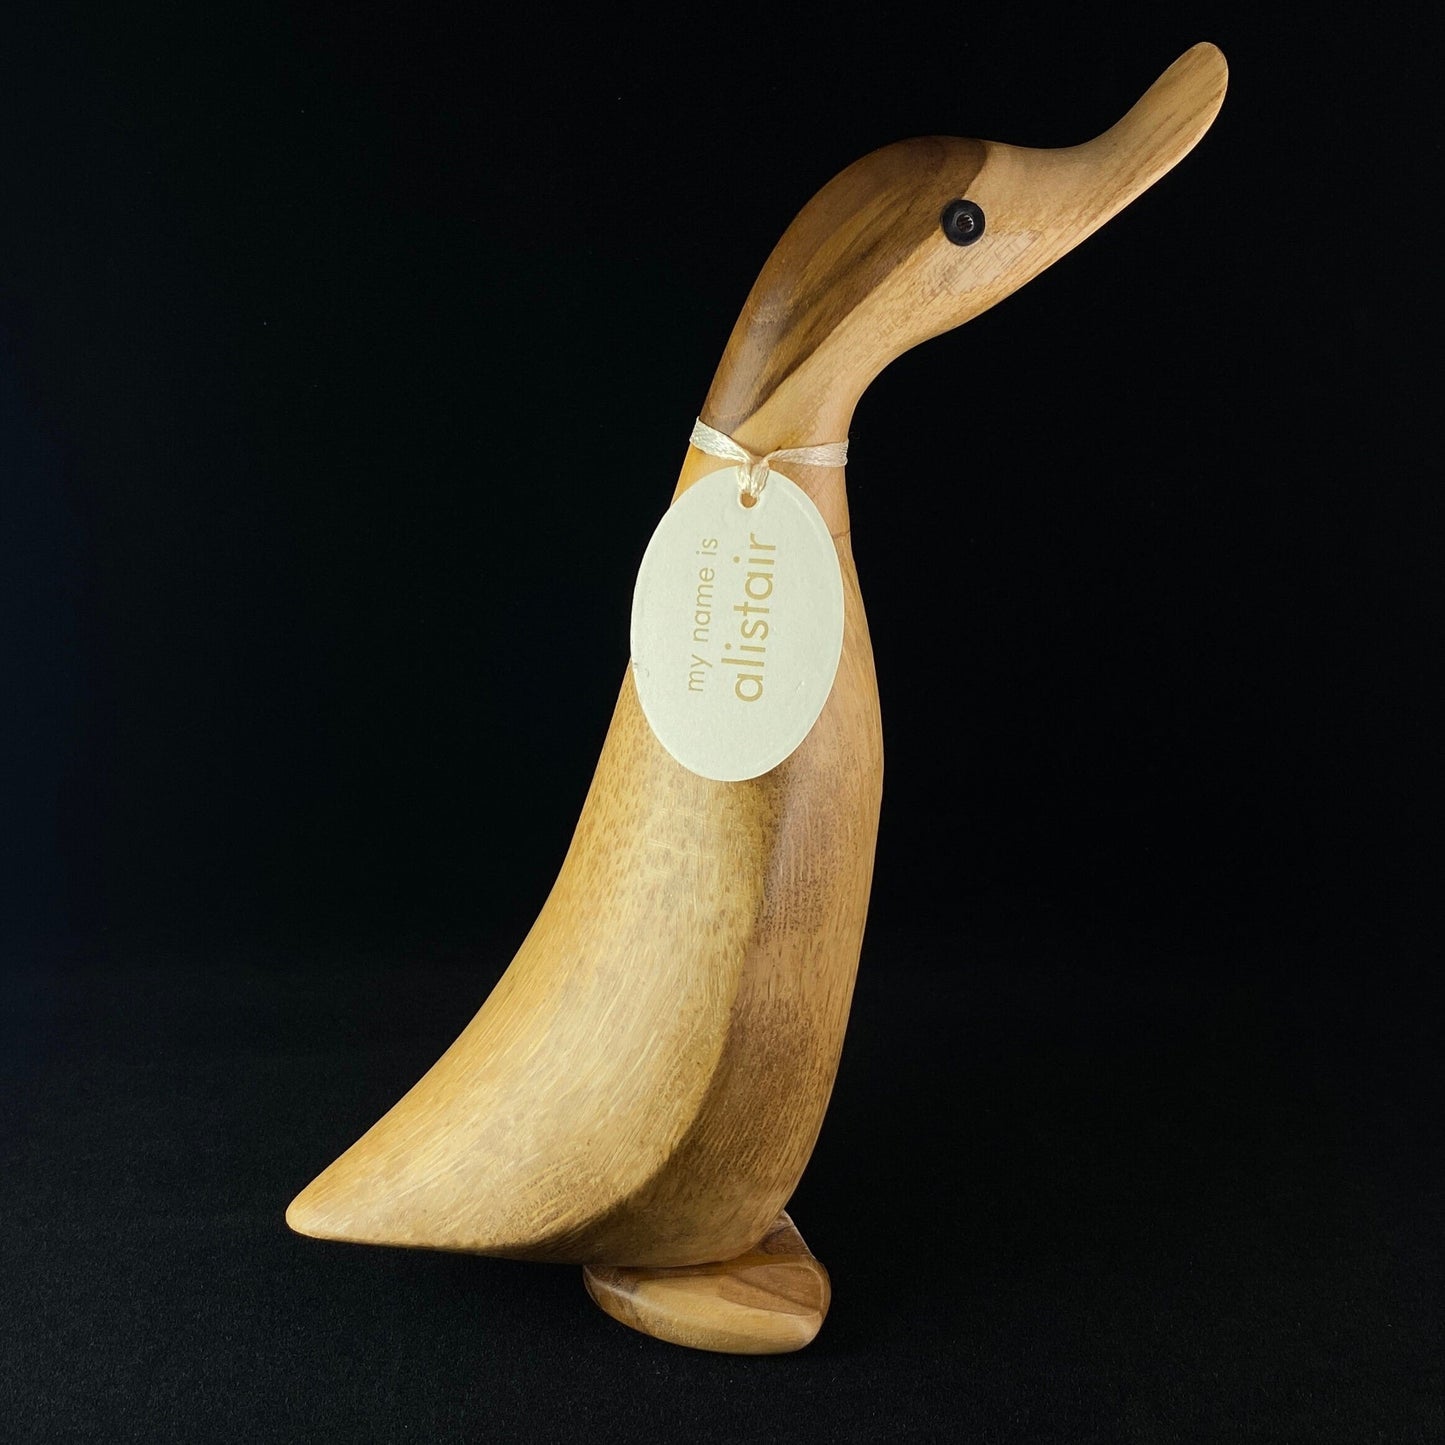 Alistair - Hand-carved and Hand-painted Bamboo Duck